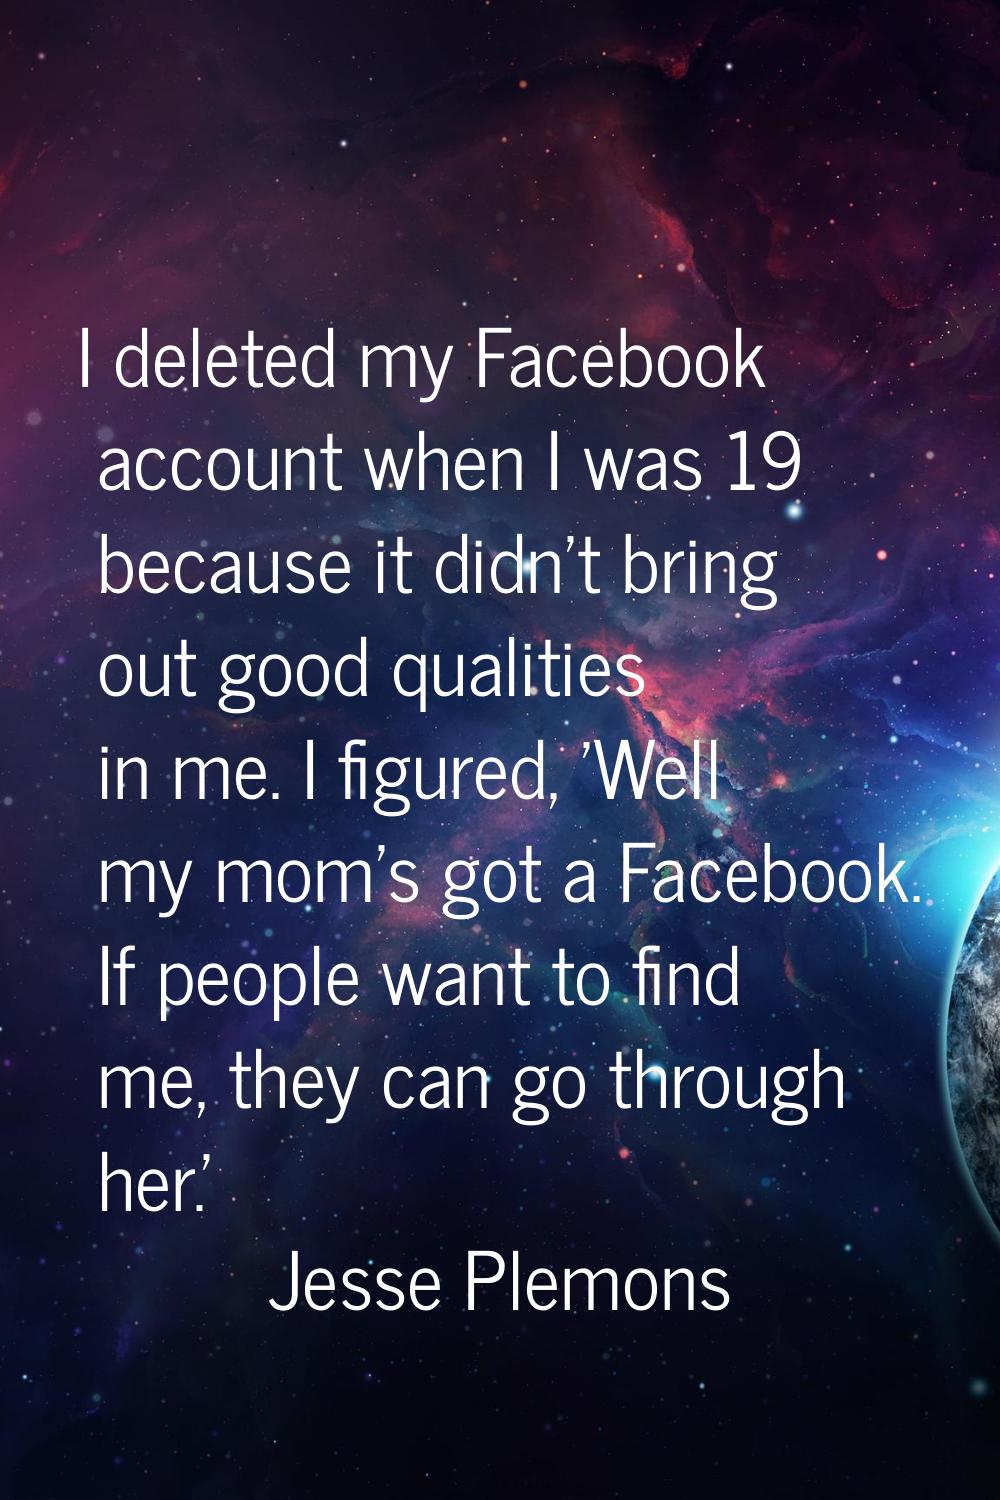 I deleted my Facebook account when I was 19 because it didn't bring out good qualities in me. I fig